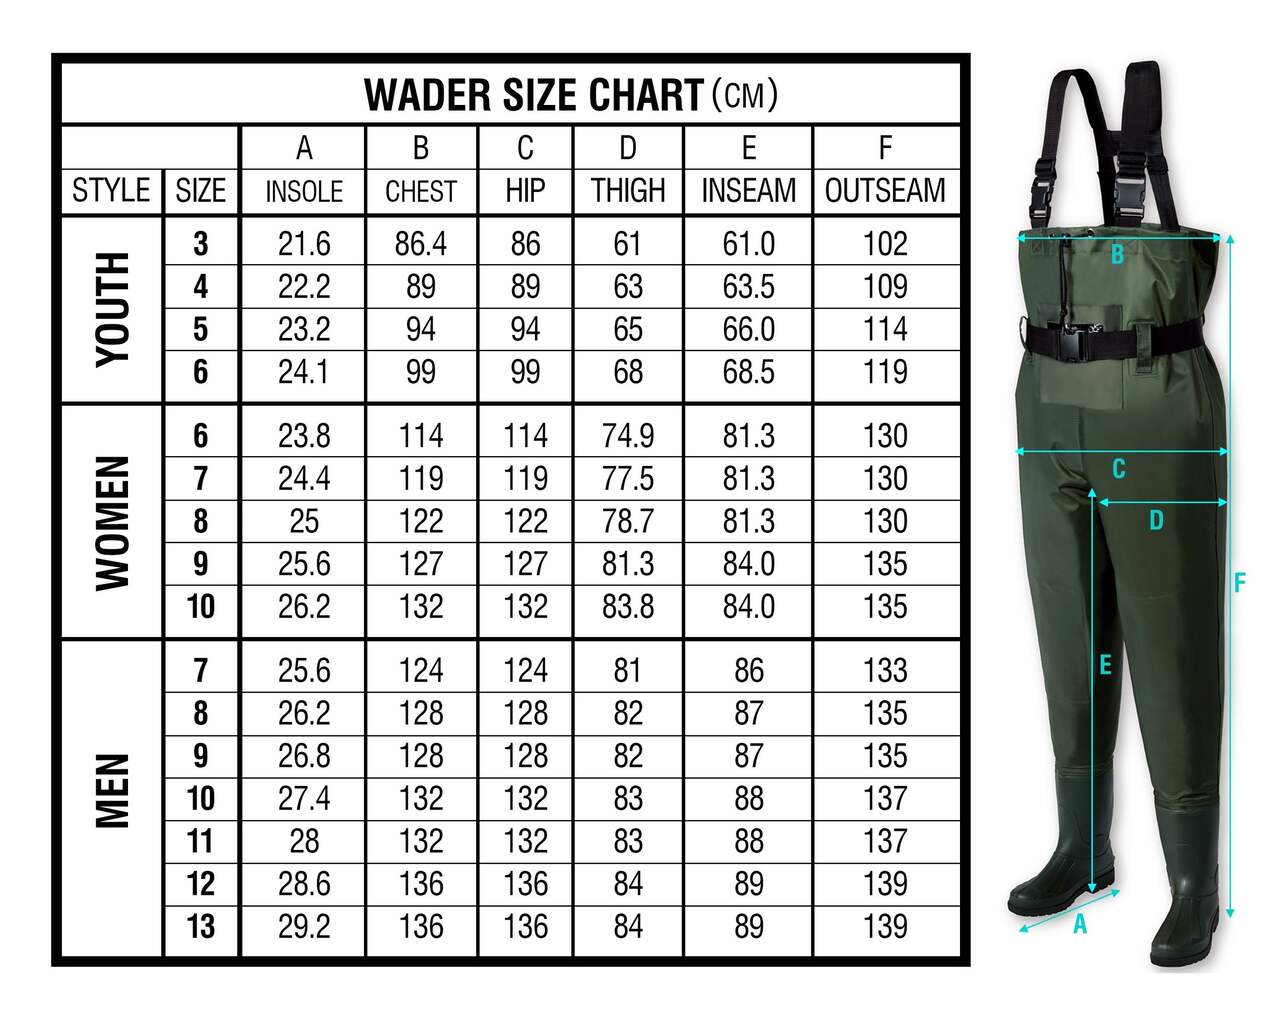 Outbound Women's Bootfoot Wader, Green